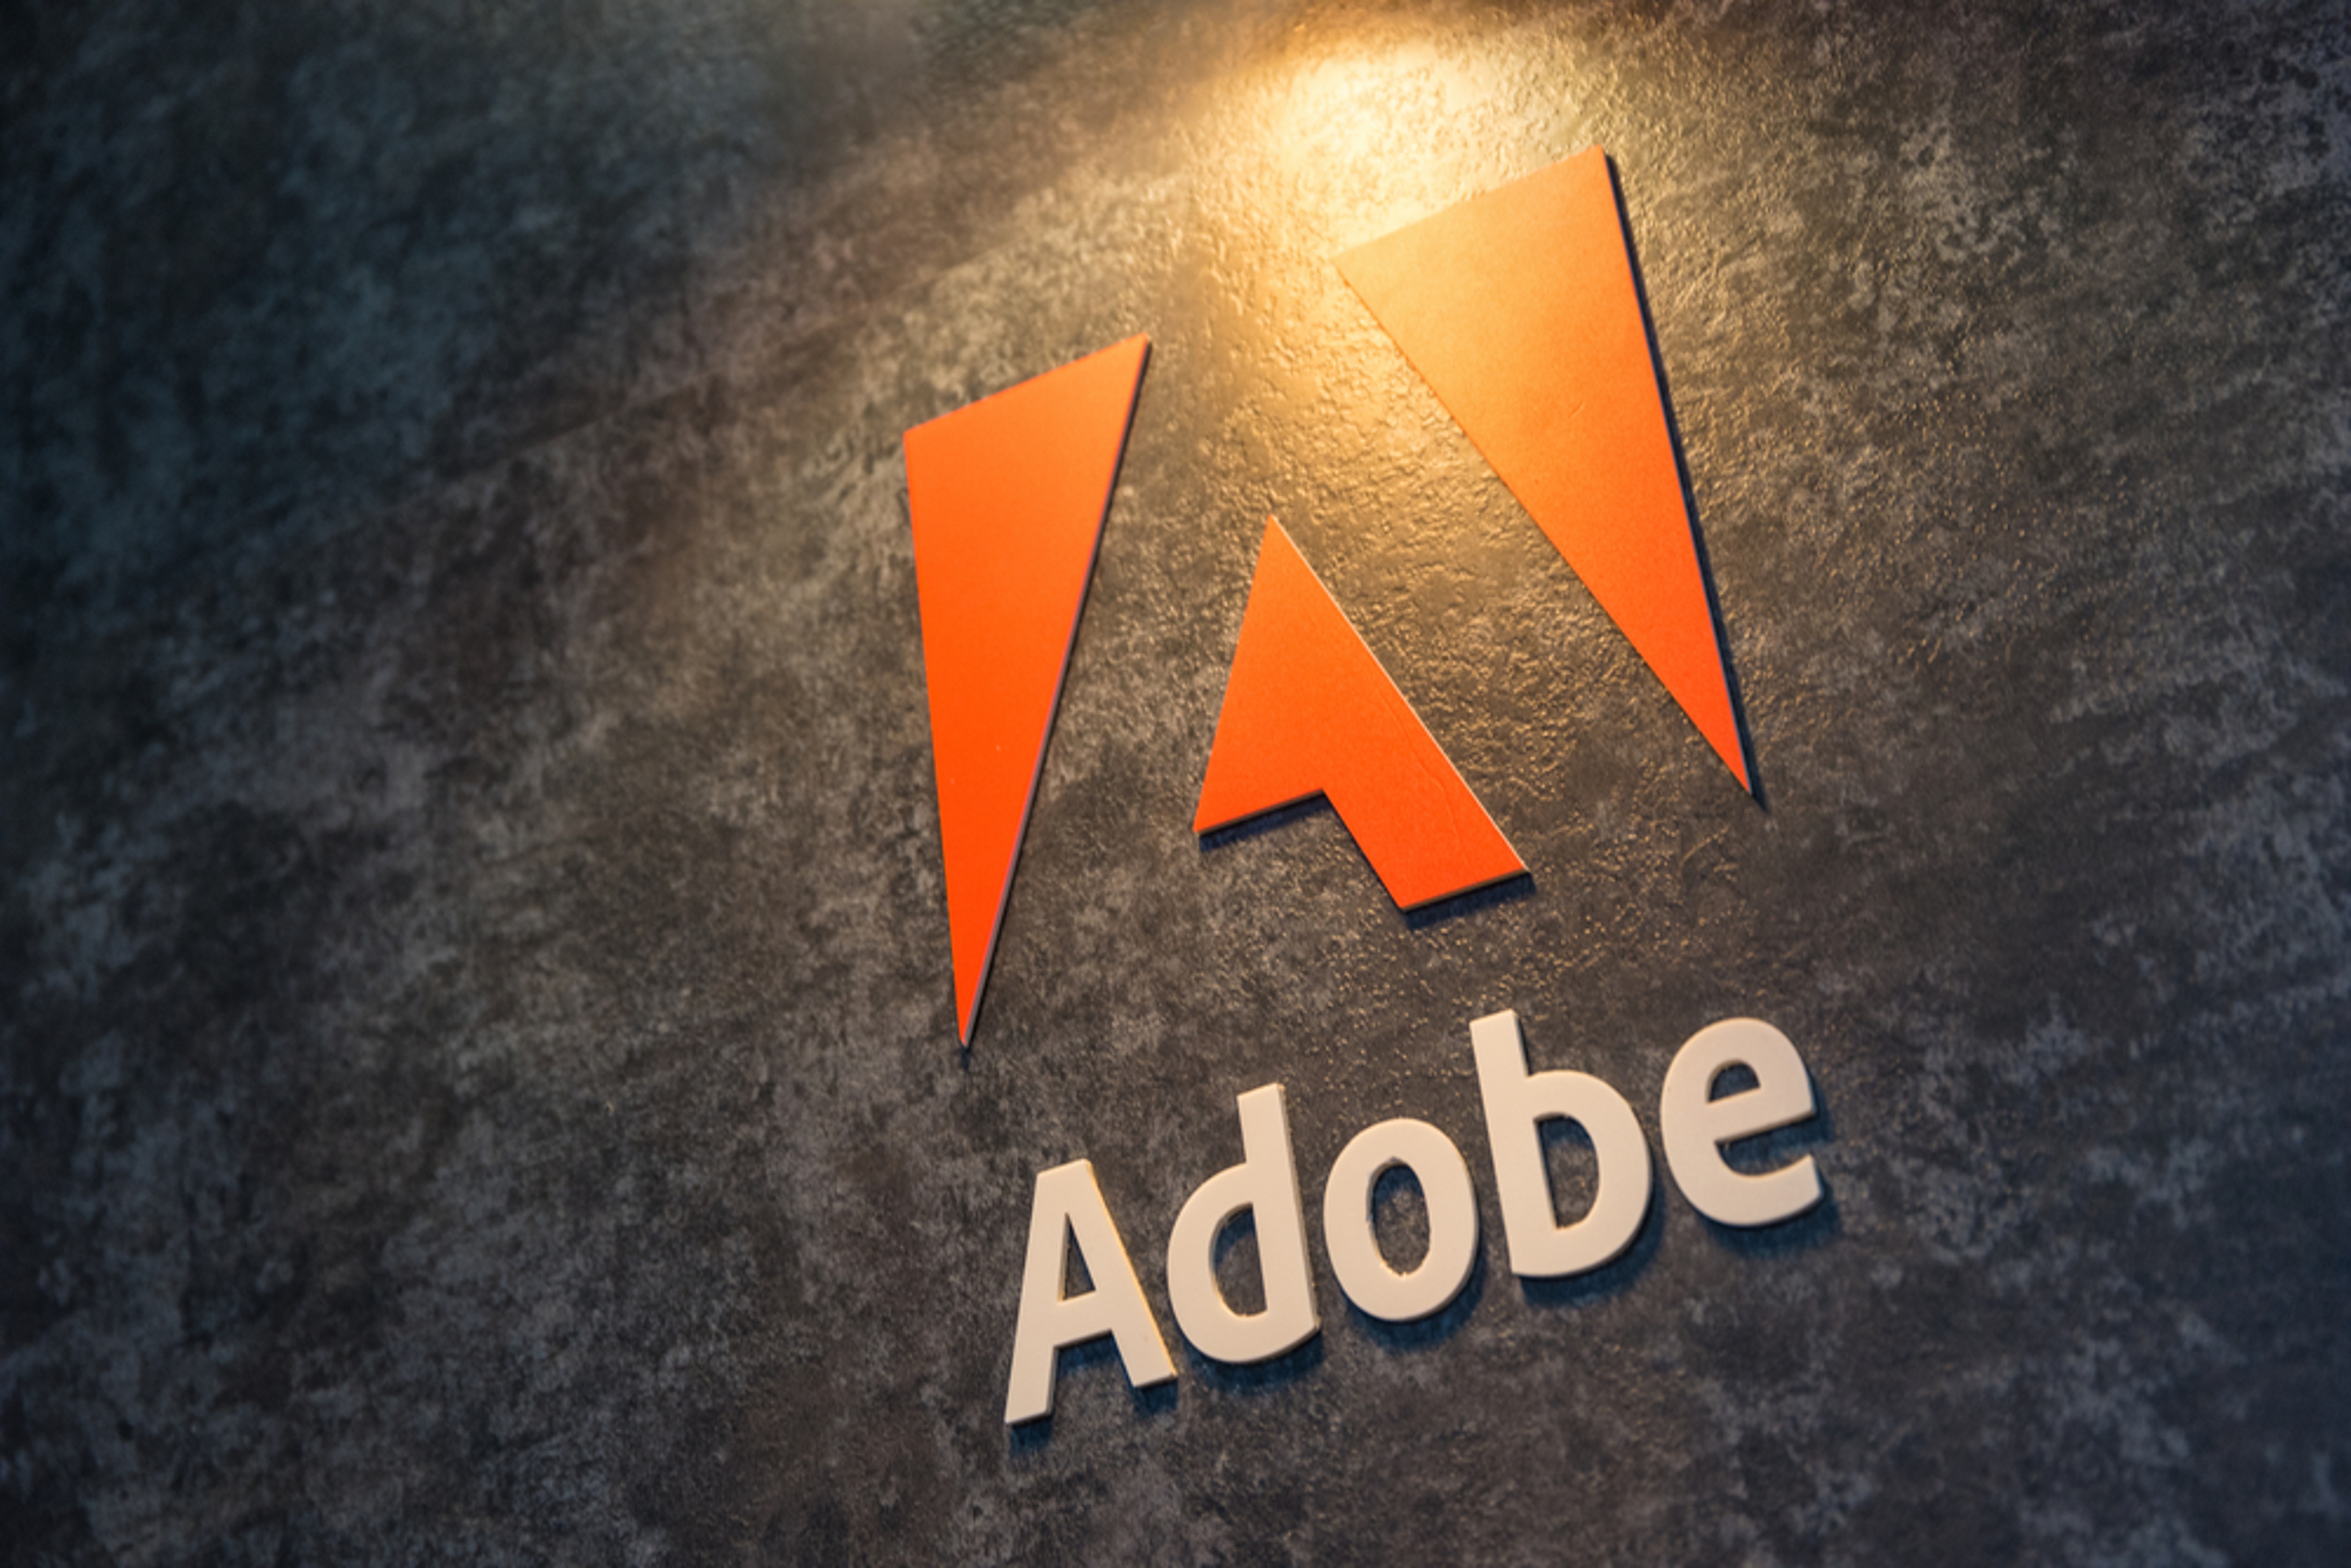 6 Adobe Analysts React To Q2 Earnings Beat, Guidance Cut, Heightened Execution Risks